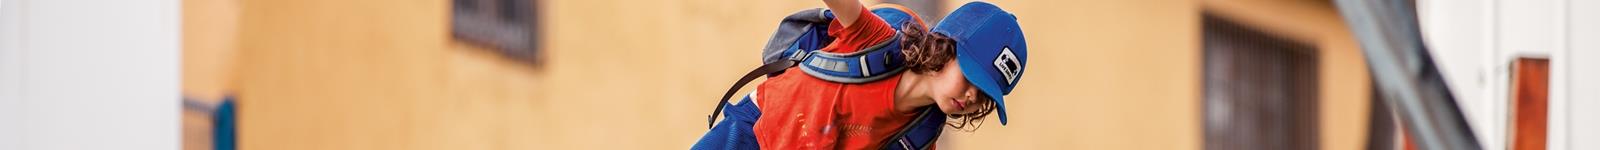 Fjallraven Kids Backpacks, Bags, and Totes 